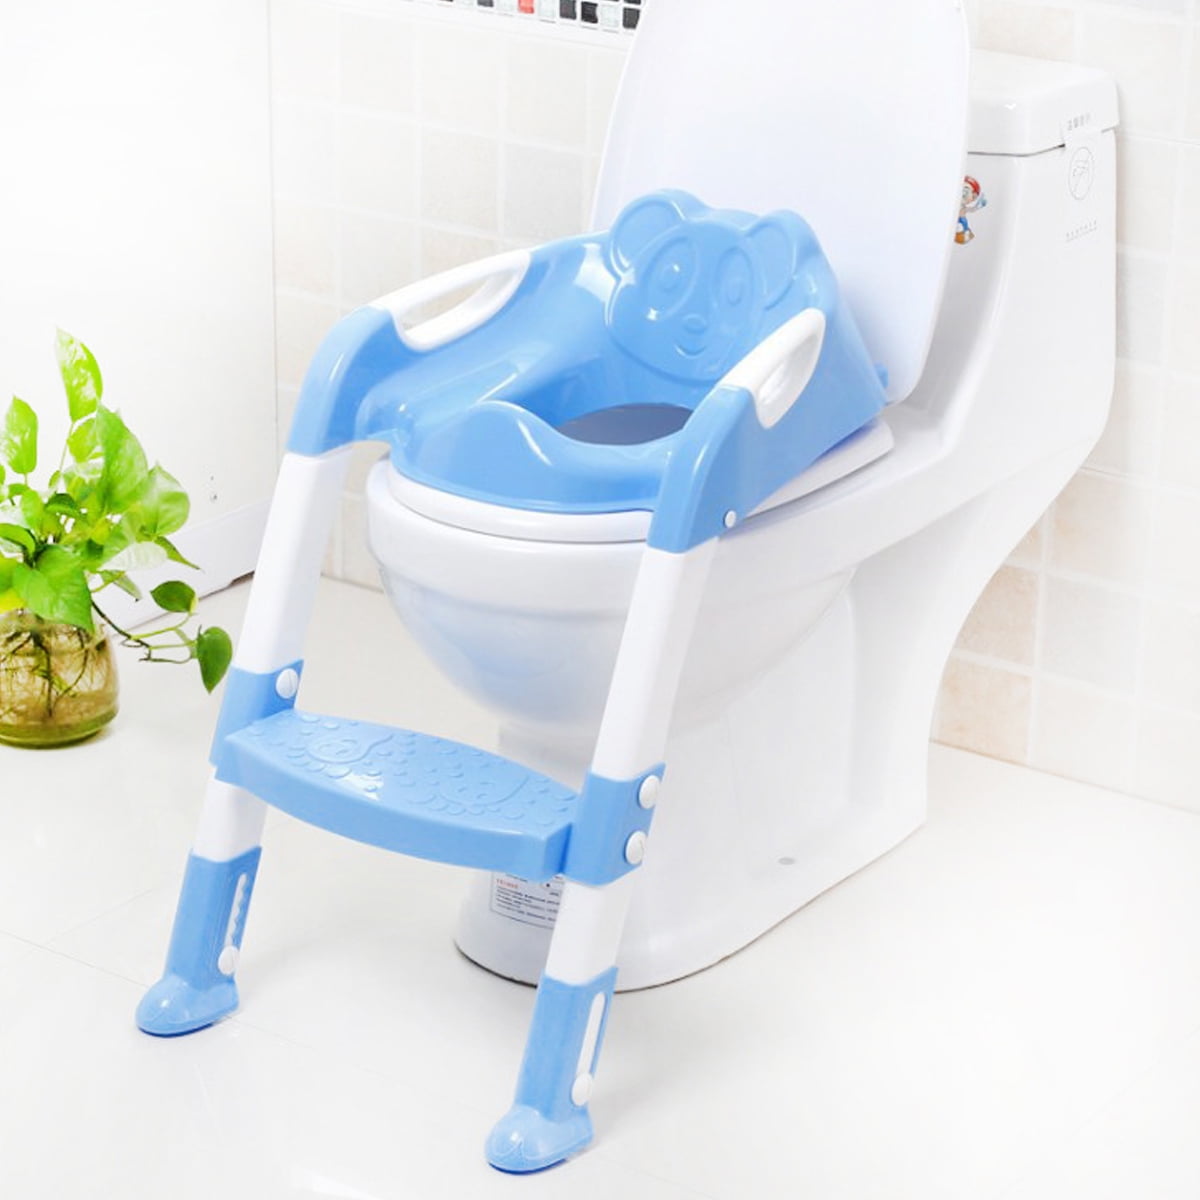 Potty Training Seat with Step Stool Ladder and Handles for Baby Toddler Kid Children Boys and Girls Toilet Training Chair with Padded Soft,Blue 